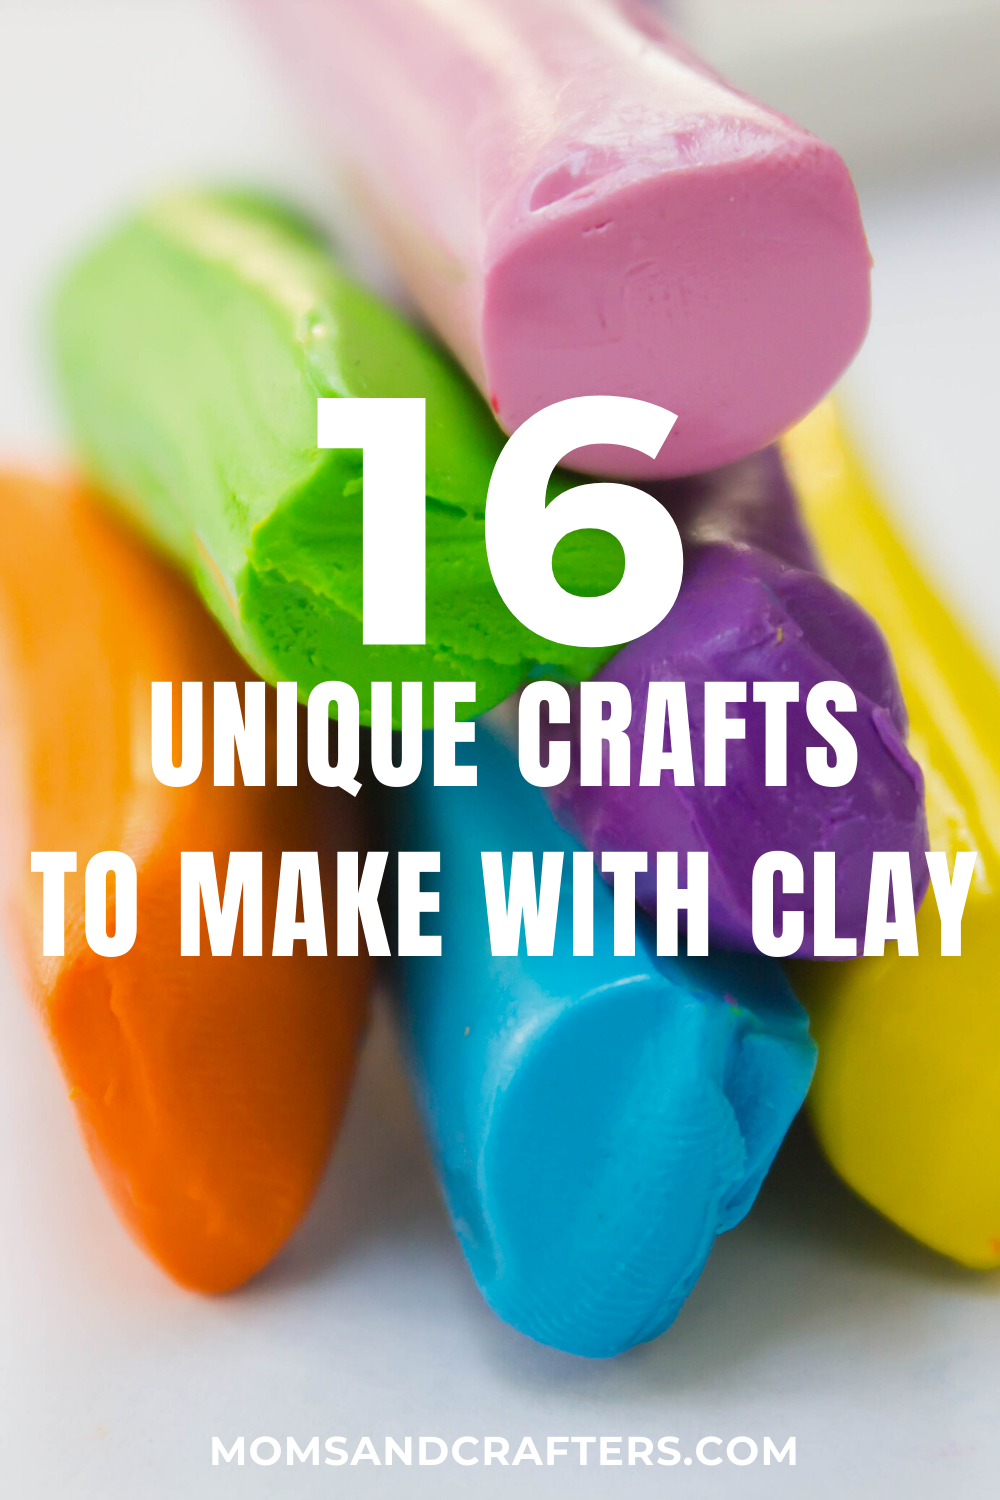 Home Craft Projects 9 Helpful Air Dry Clay Tips & Tricks